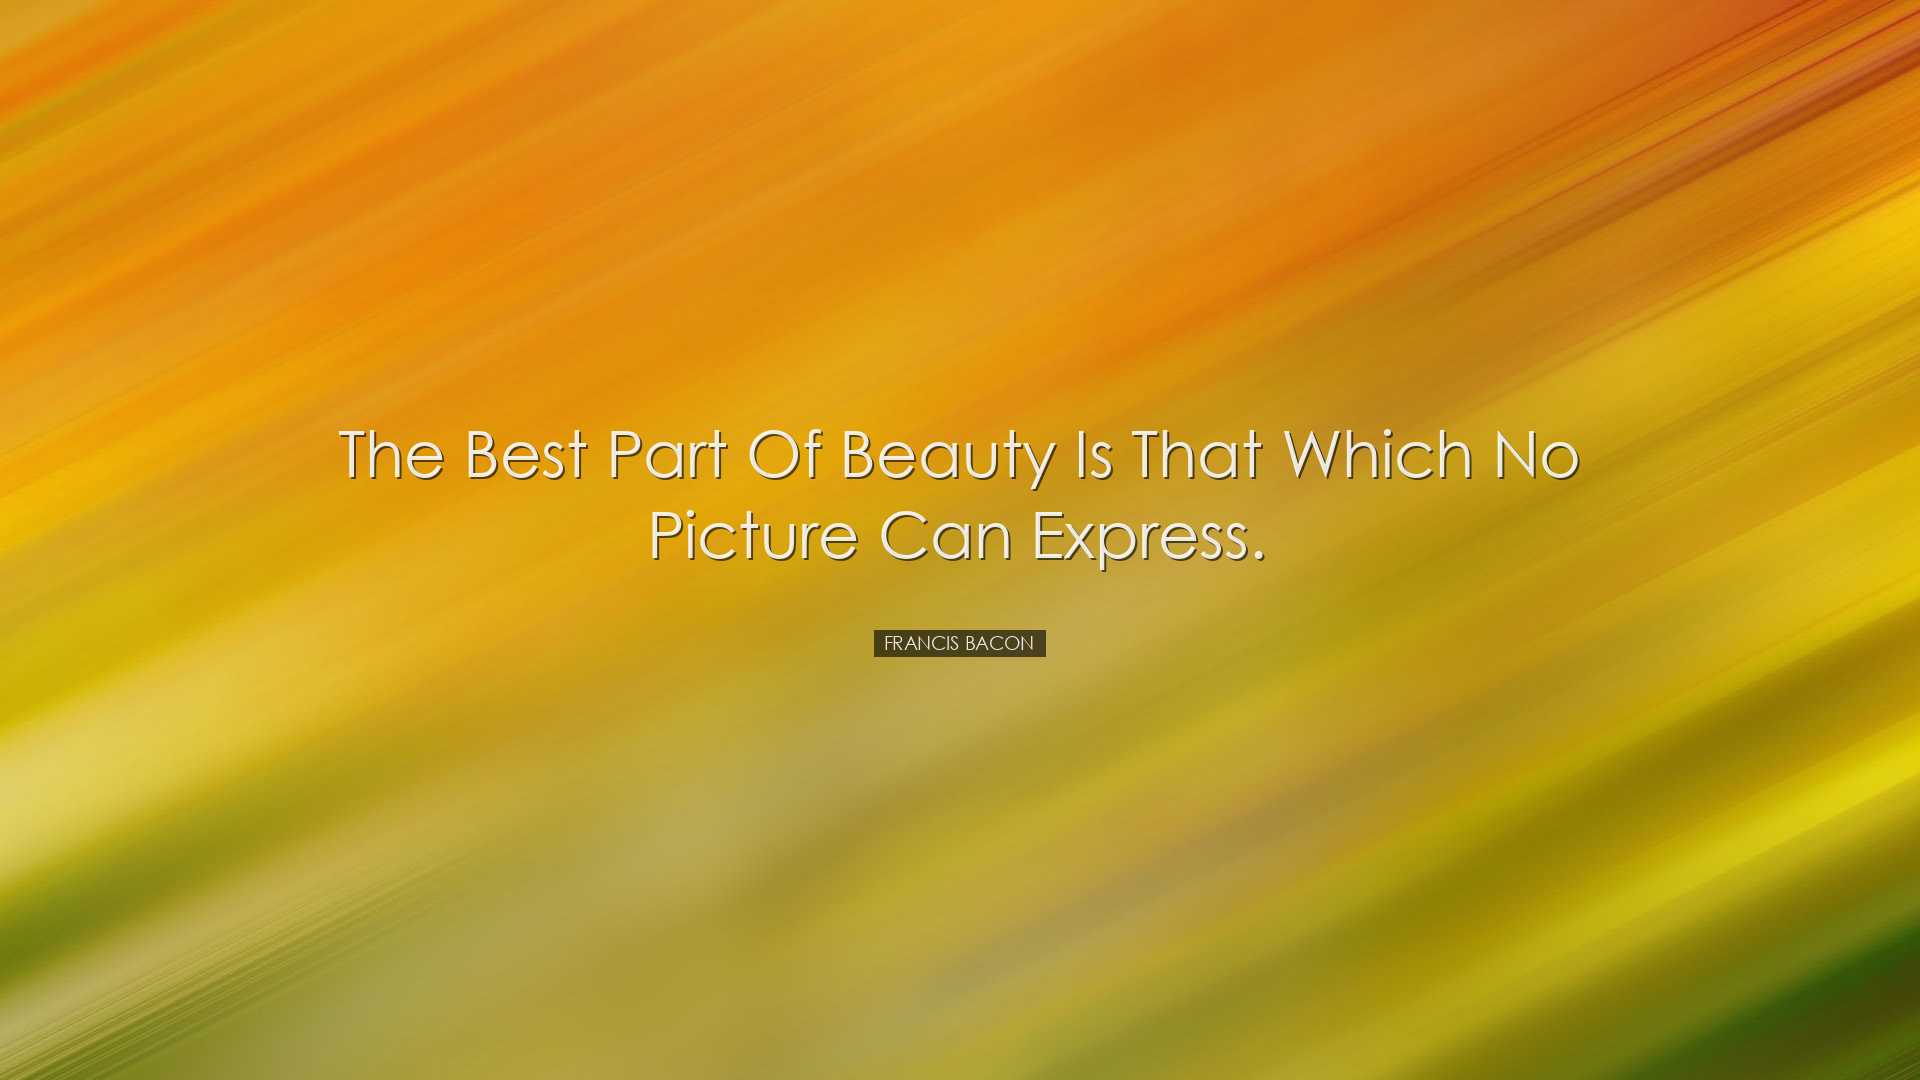 The best part of beauty is that which no picture can express. - Fr